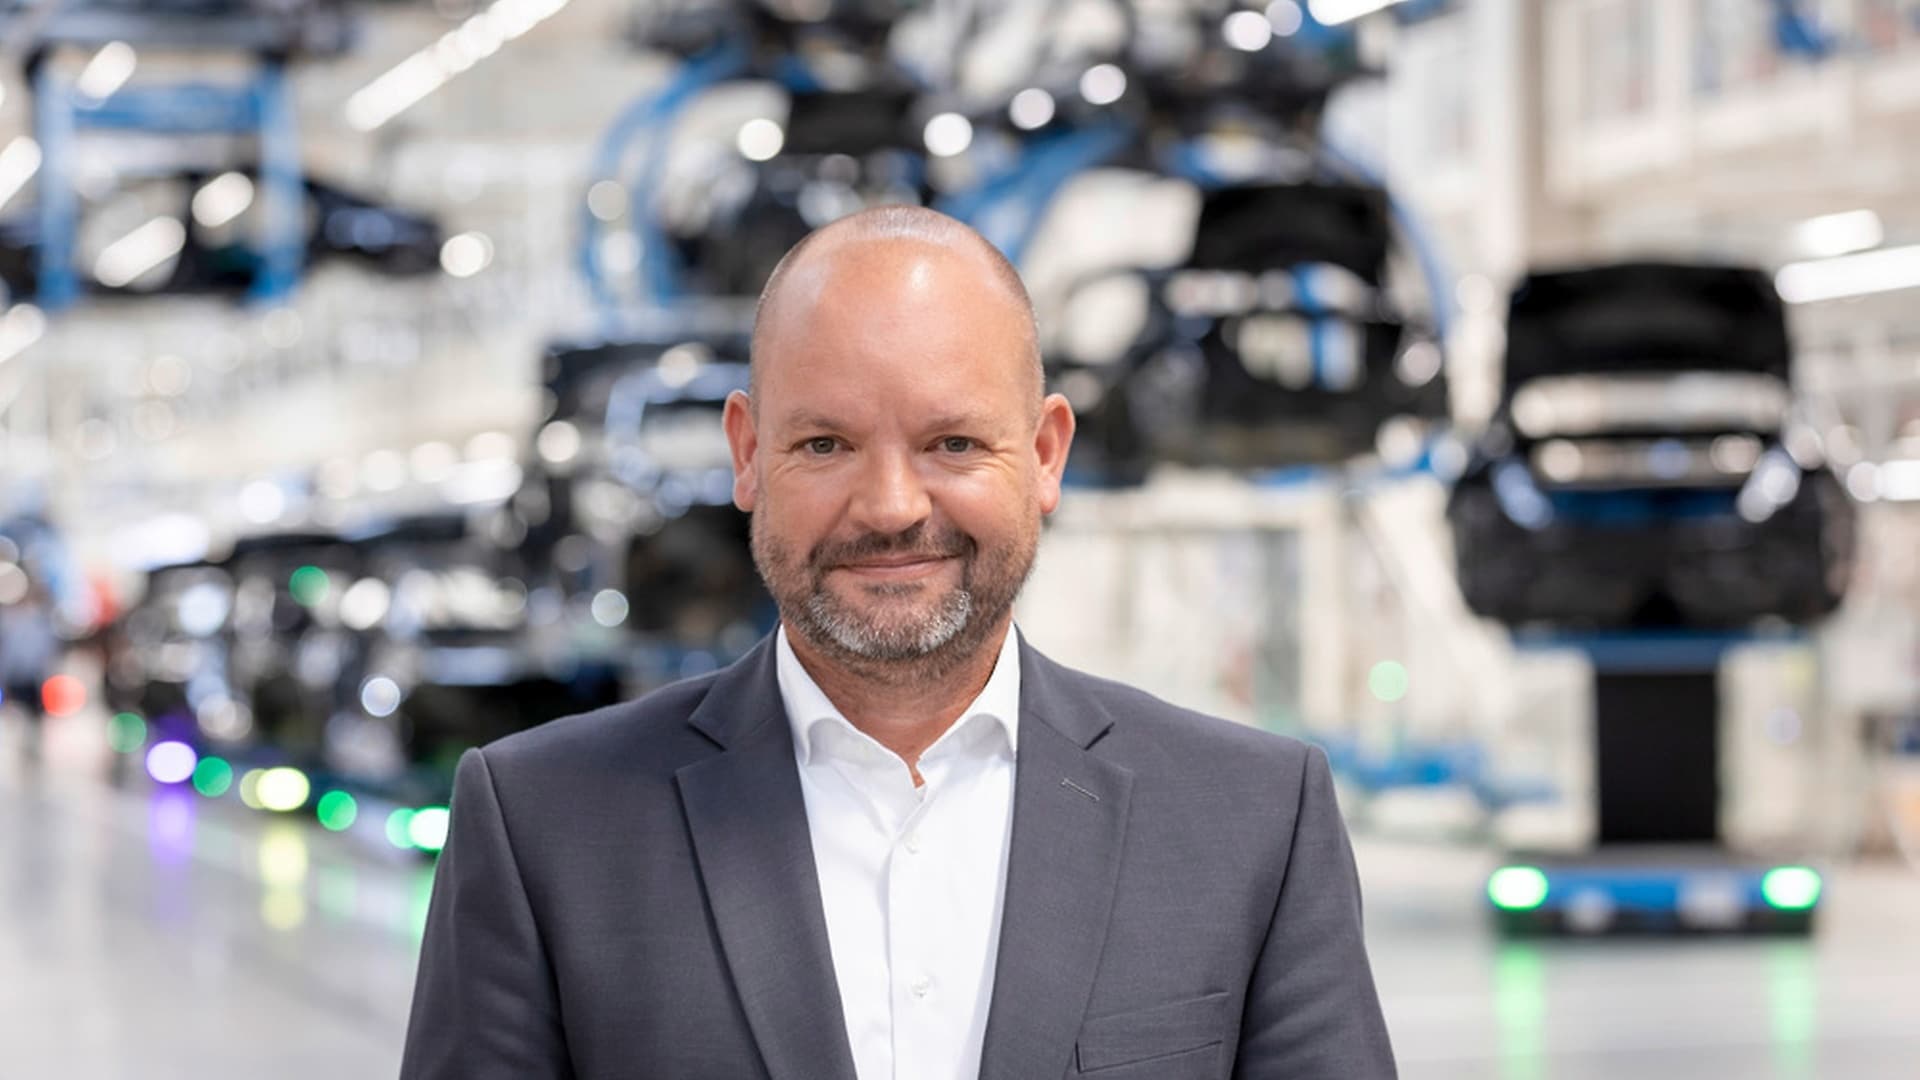 Jörg Burzer, currently Member of the Board of Management responsible for Production and Supply Chain Management at Mercedes-Benz AG.